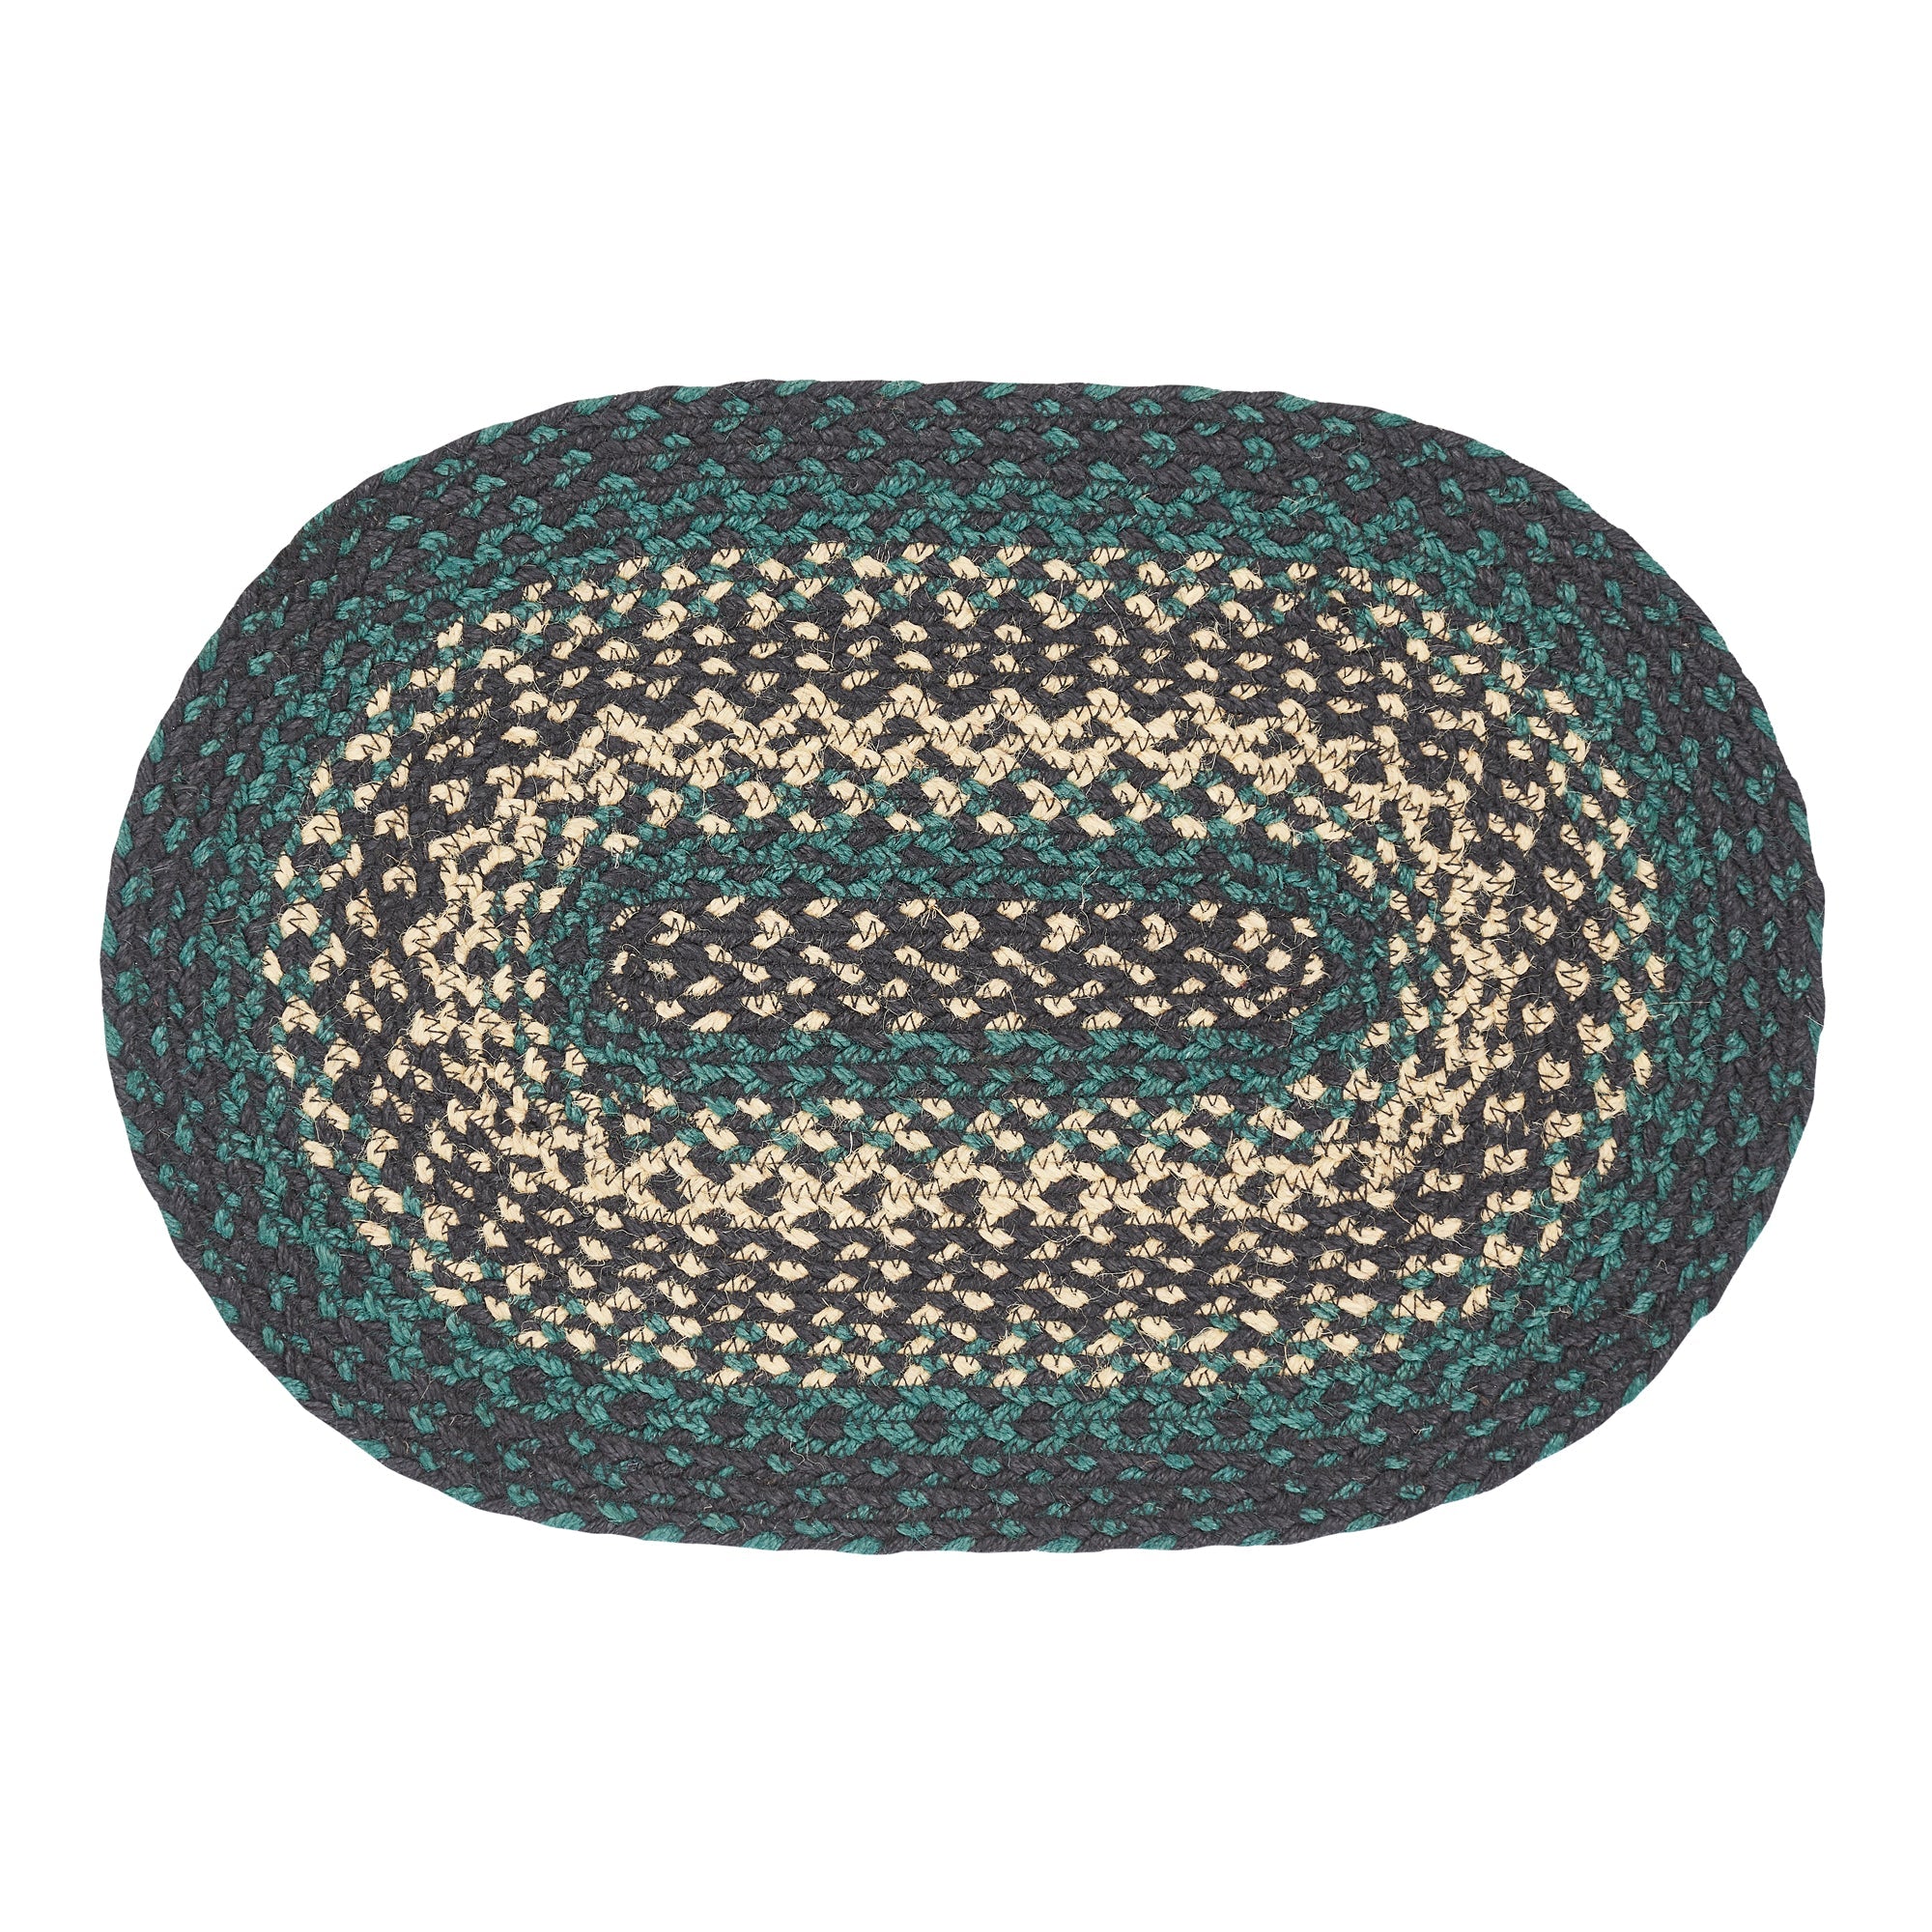 Pine Grove Jute Braided Oval Placemat 12"x18" VHC Brands